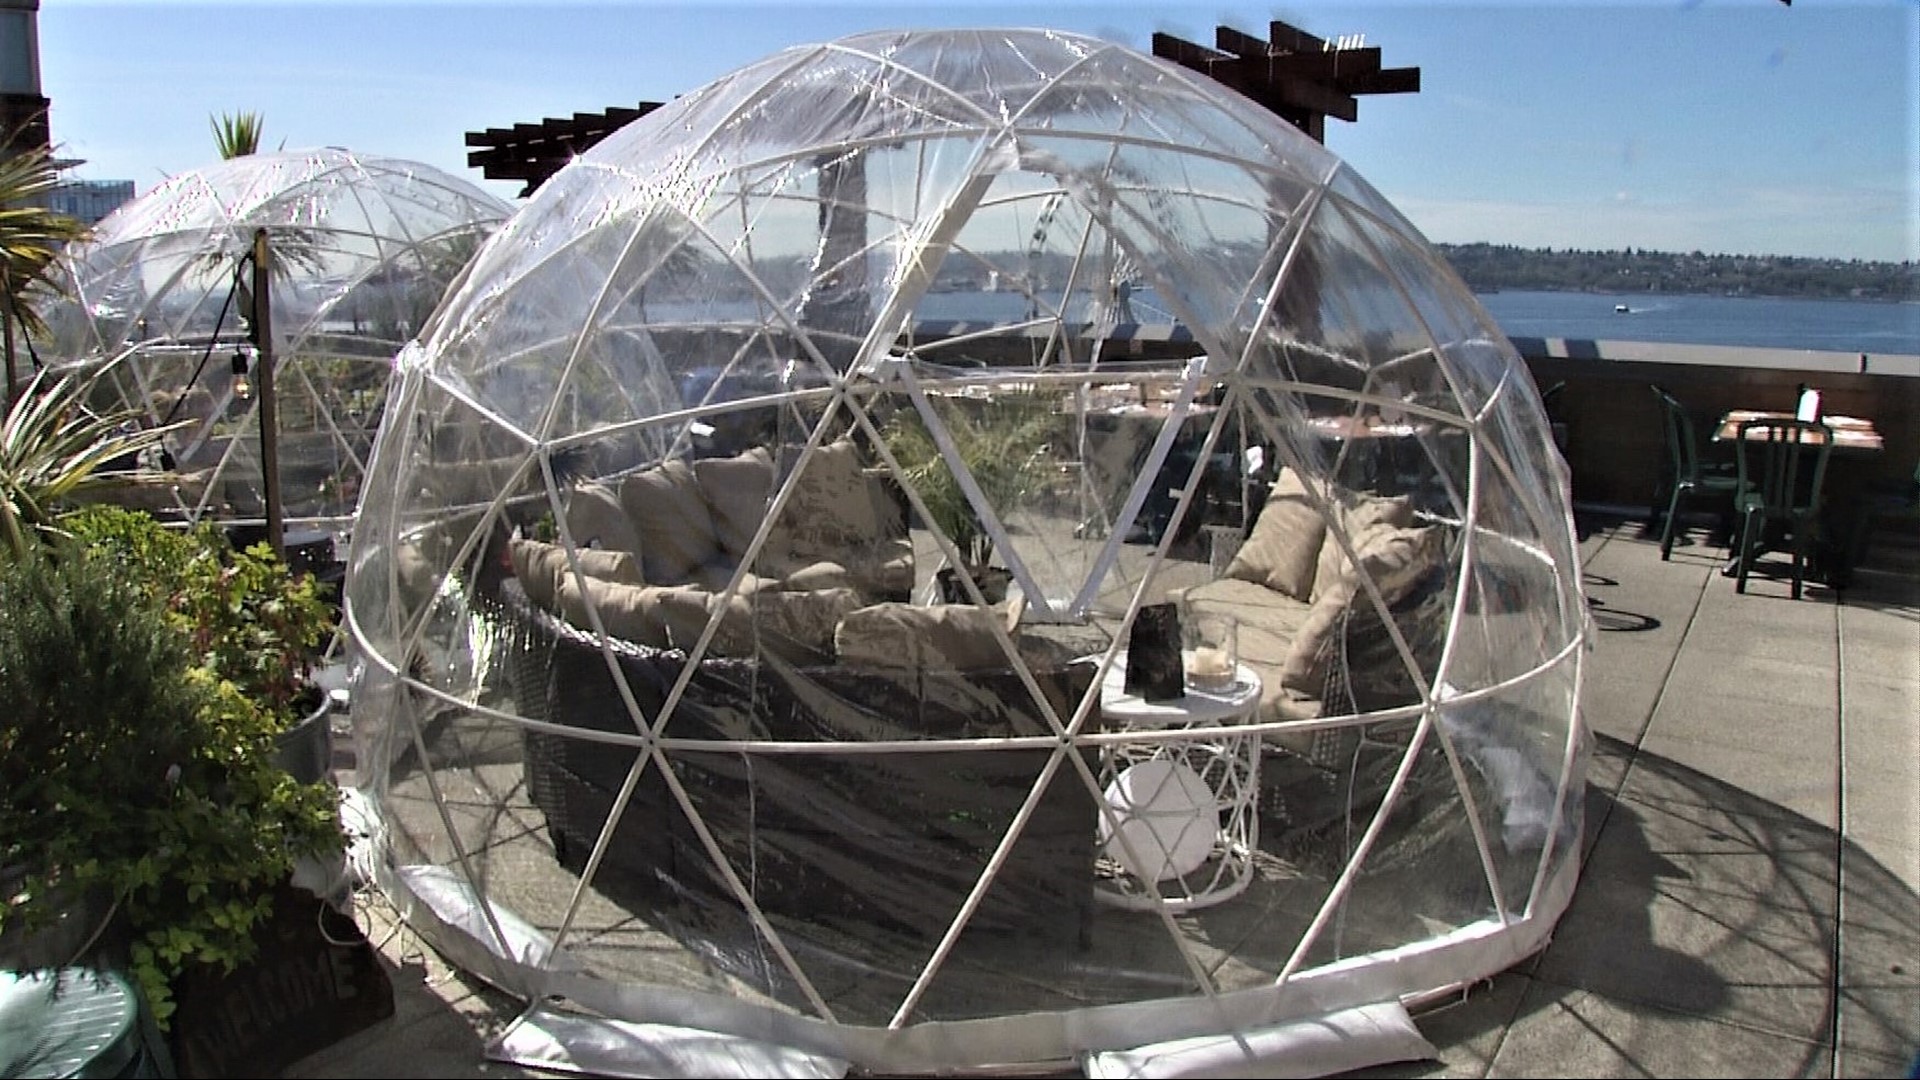 The geodesic domes are a new feature at the longtime French restaurant at Pike Place Market